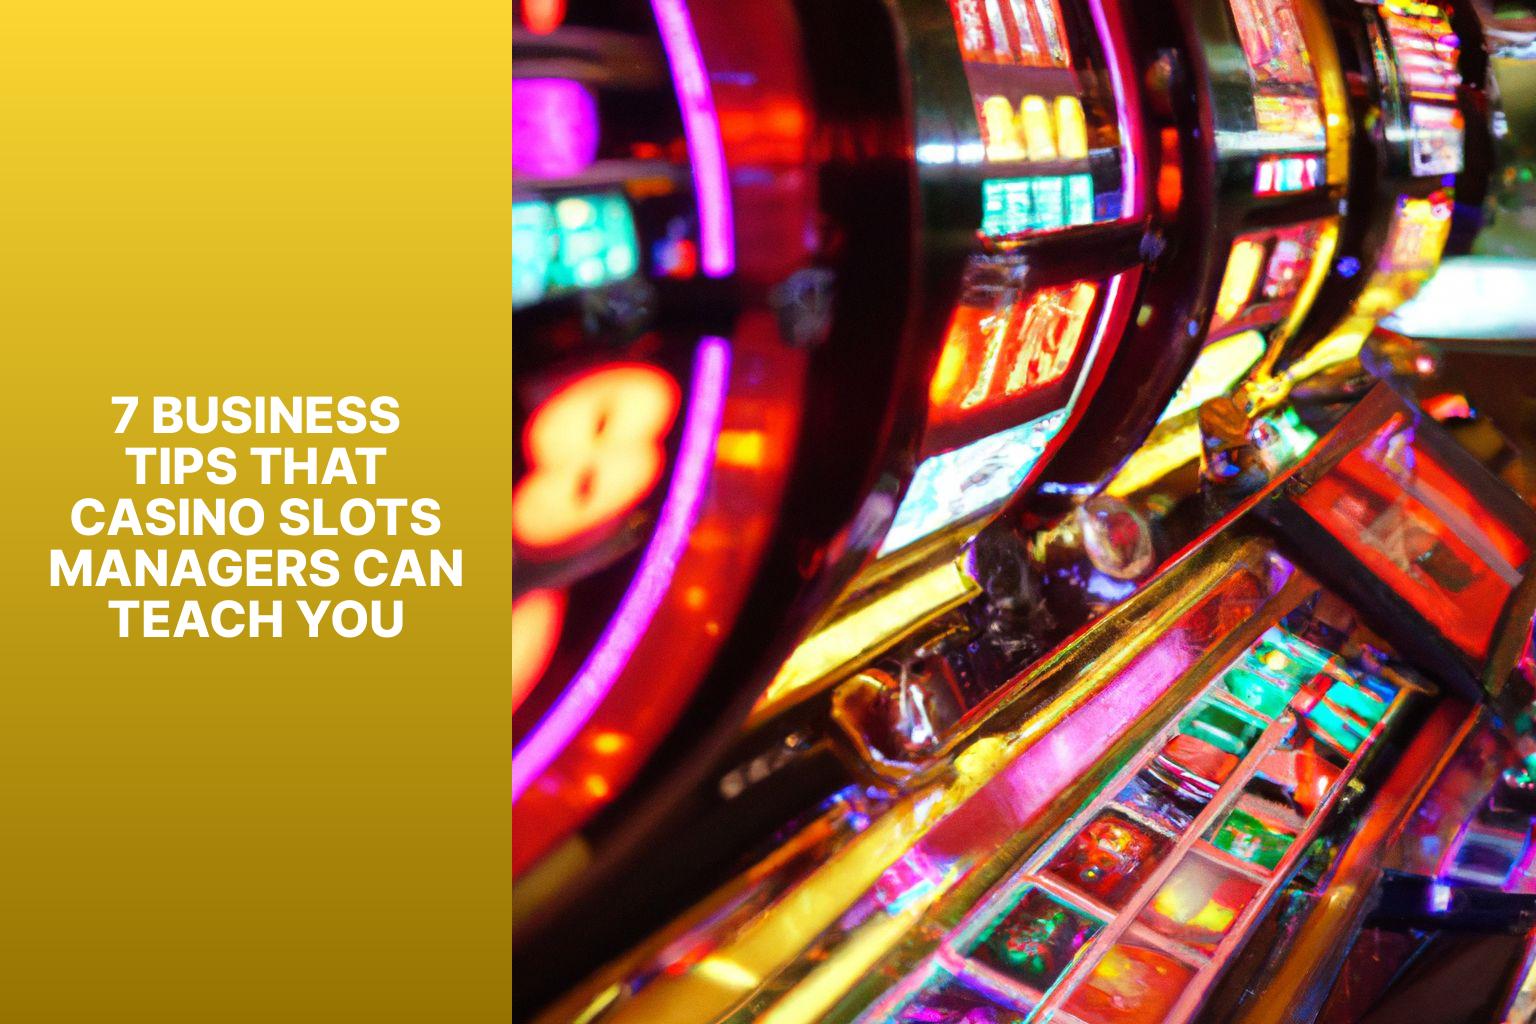 7 Business Tips That Casino Slots Managers Can Teach You